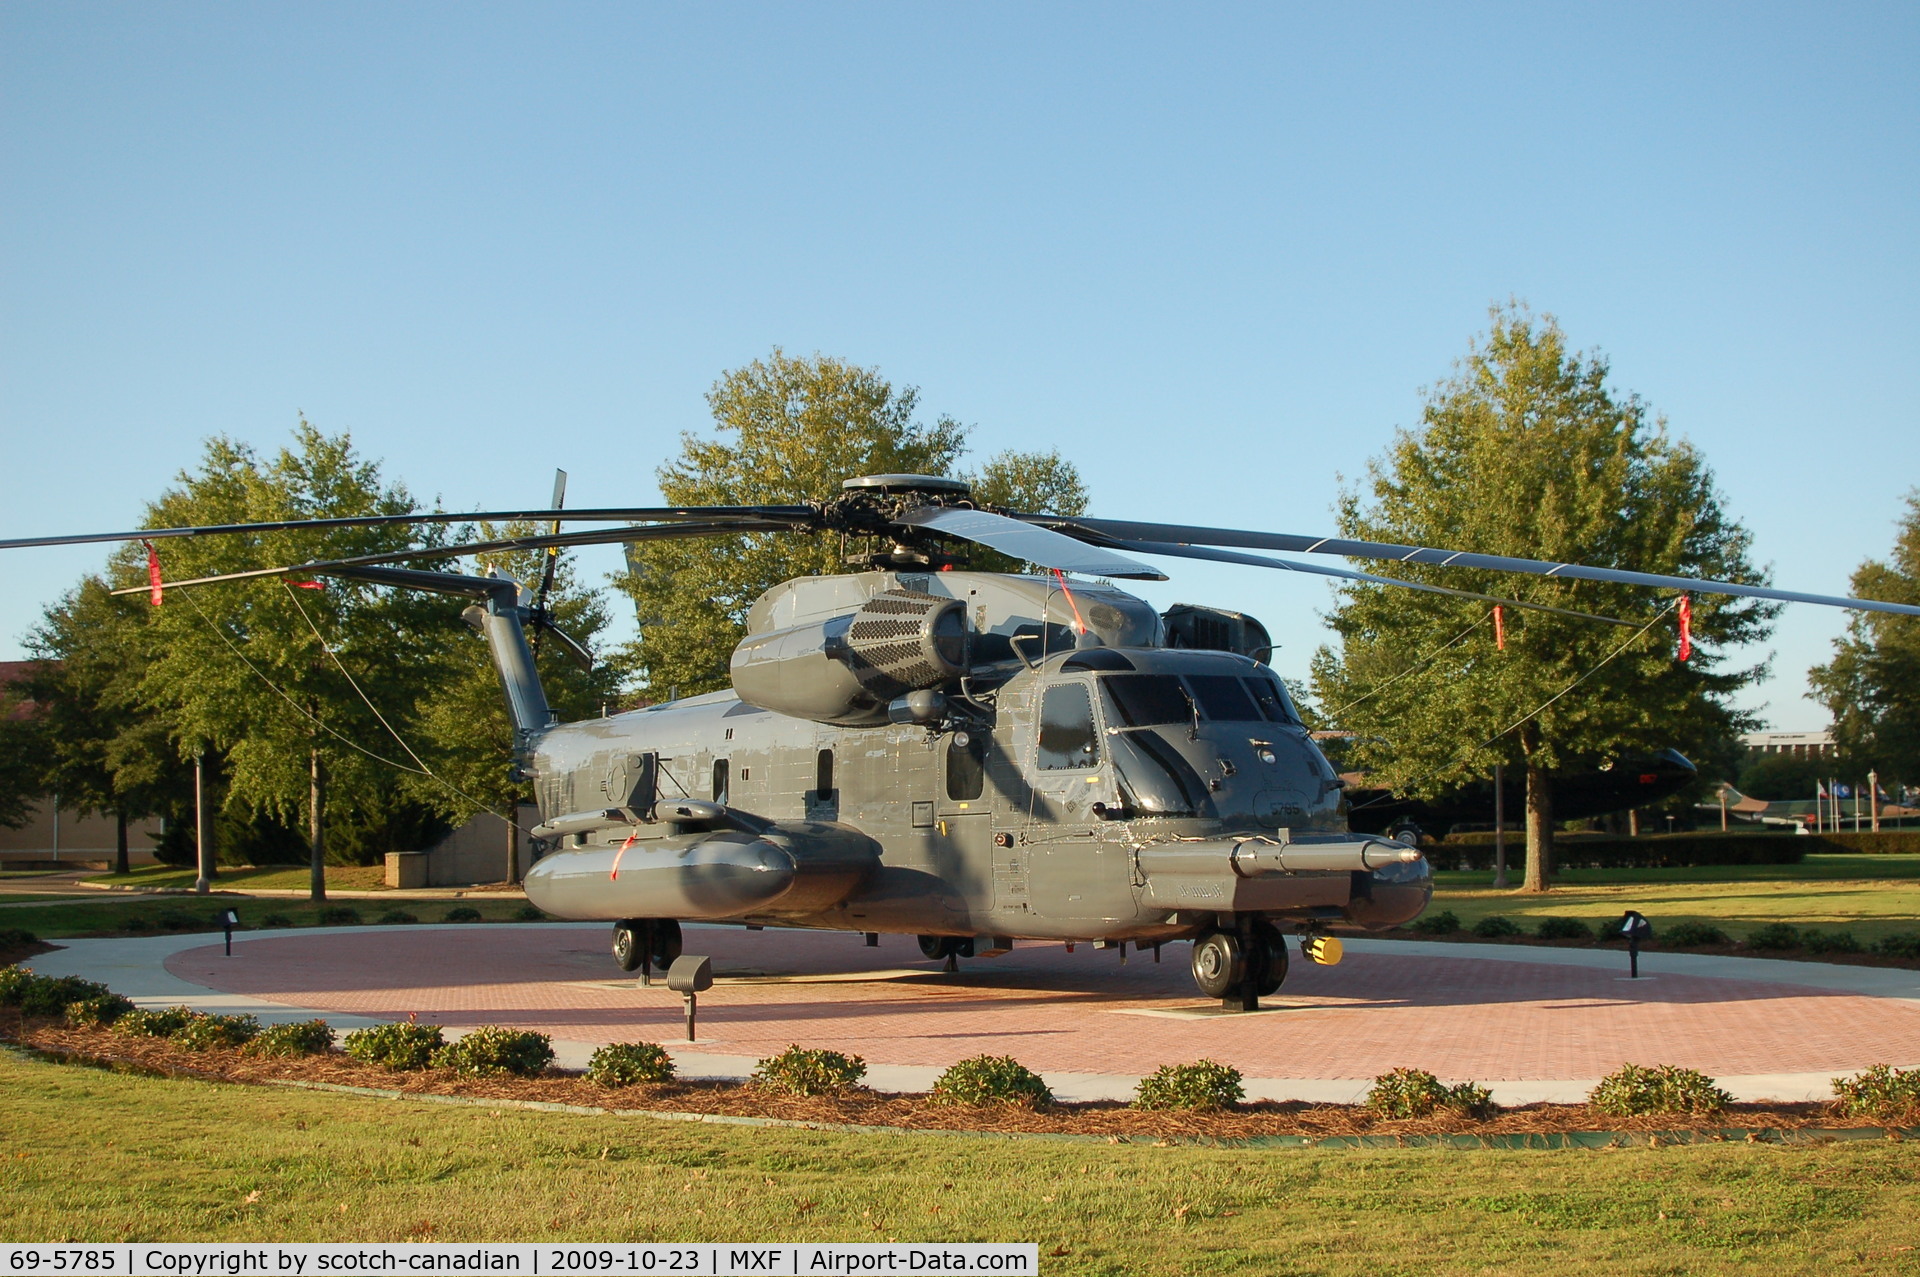 69-5785, 1969 Sikorsky MH-53M Pave Low IV C/N 65-240, 1969 Sikorsky HH-53C Super Jolly Green Giant Helicopter on display at Maxwell AFB, Montgomery, AL